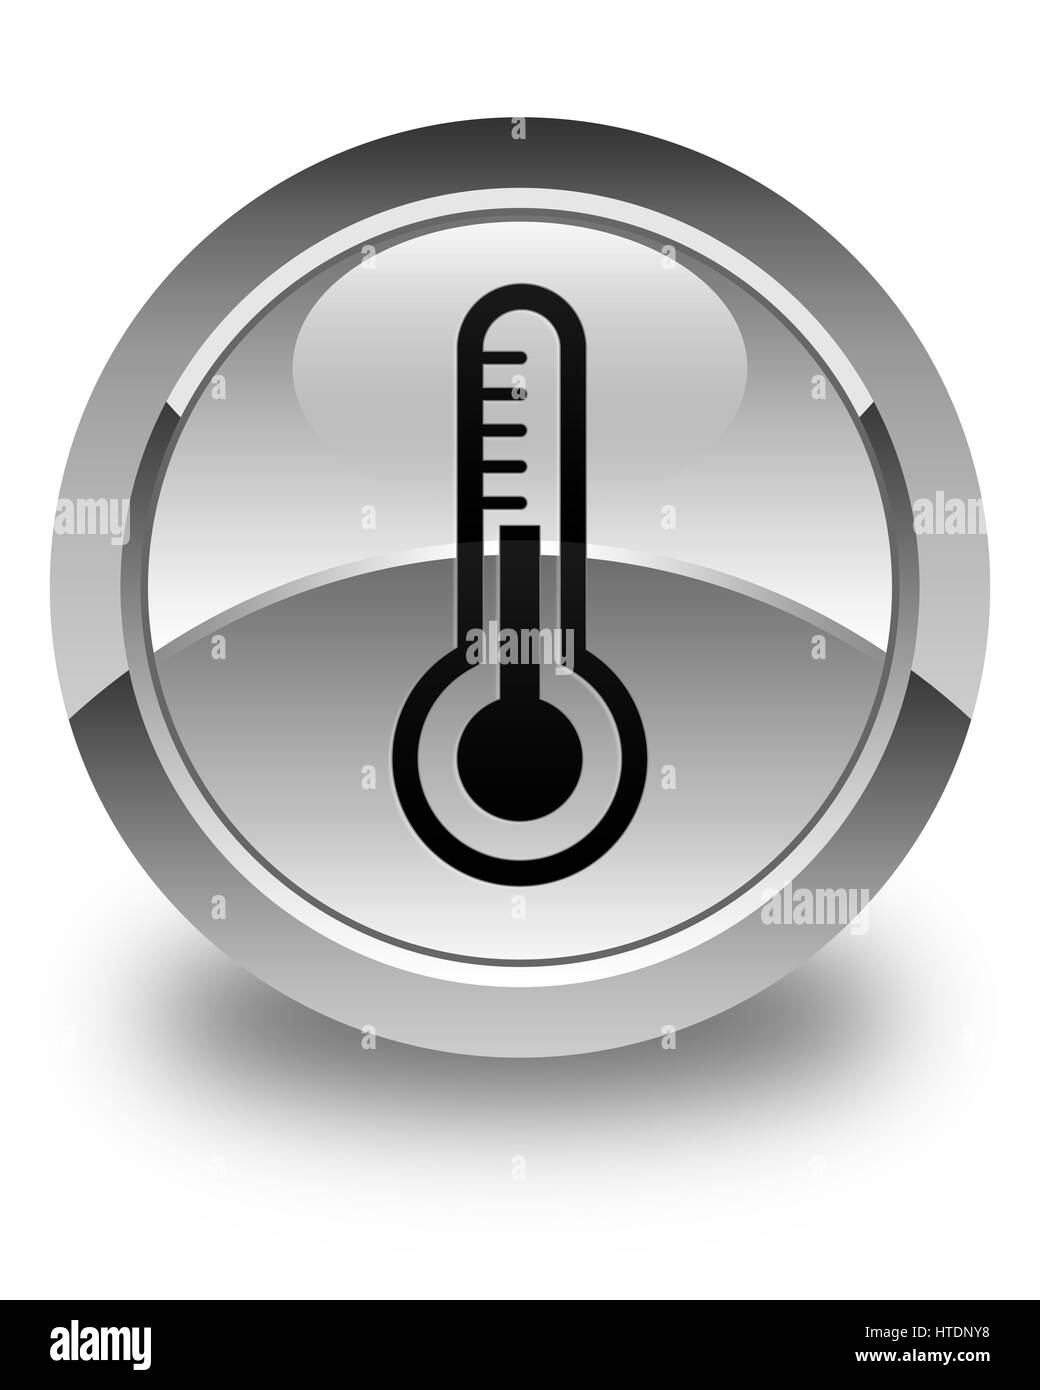 Thermometer icon isolated on glossy white round button abstract illustration Stock Photo